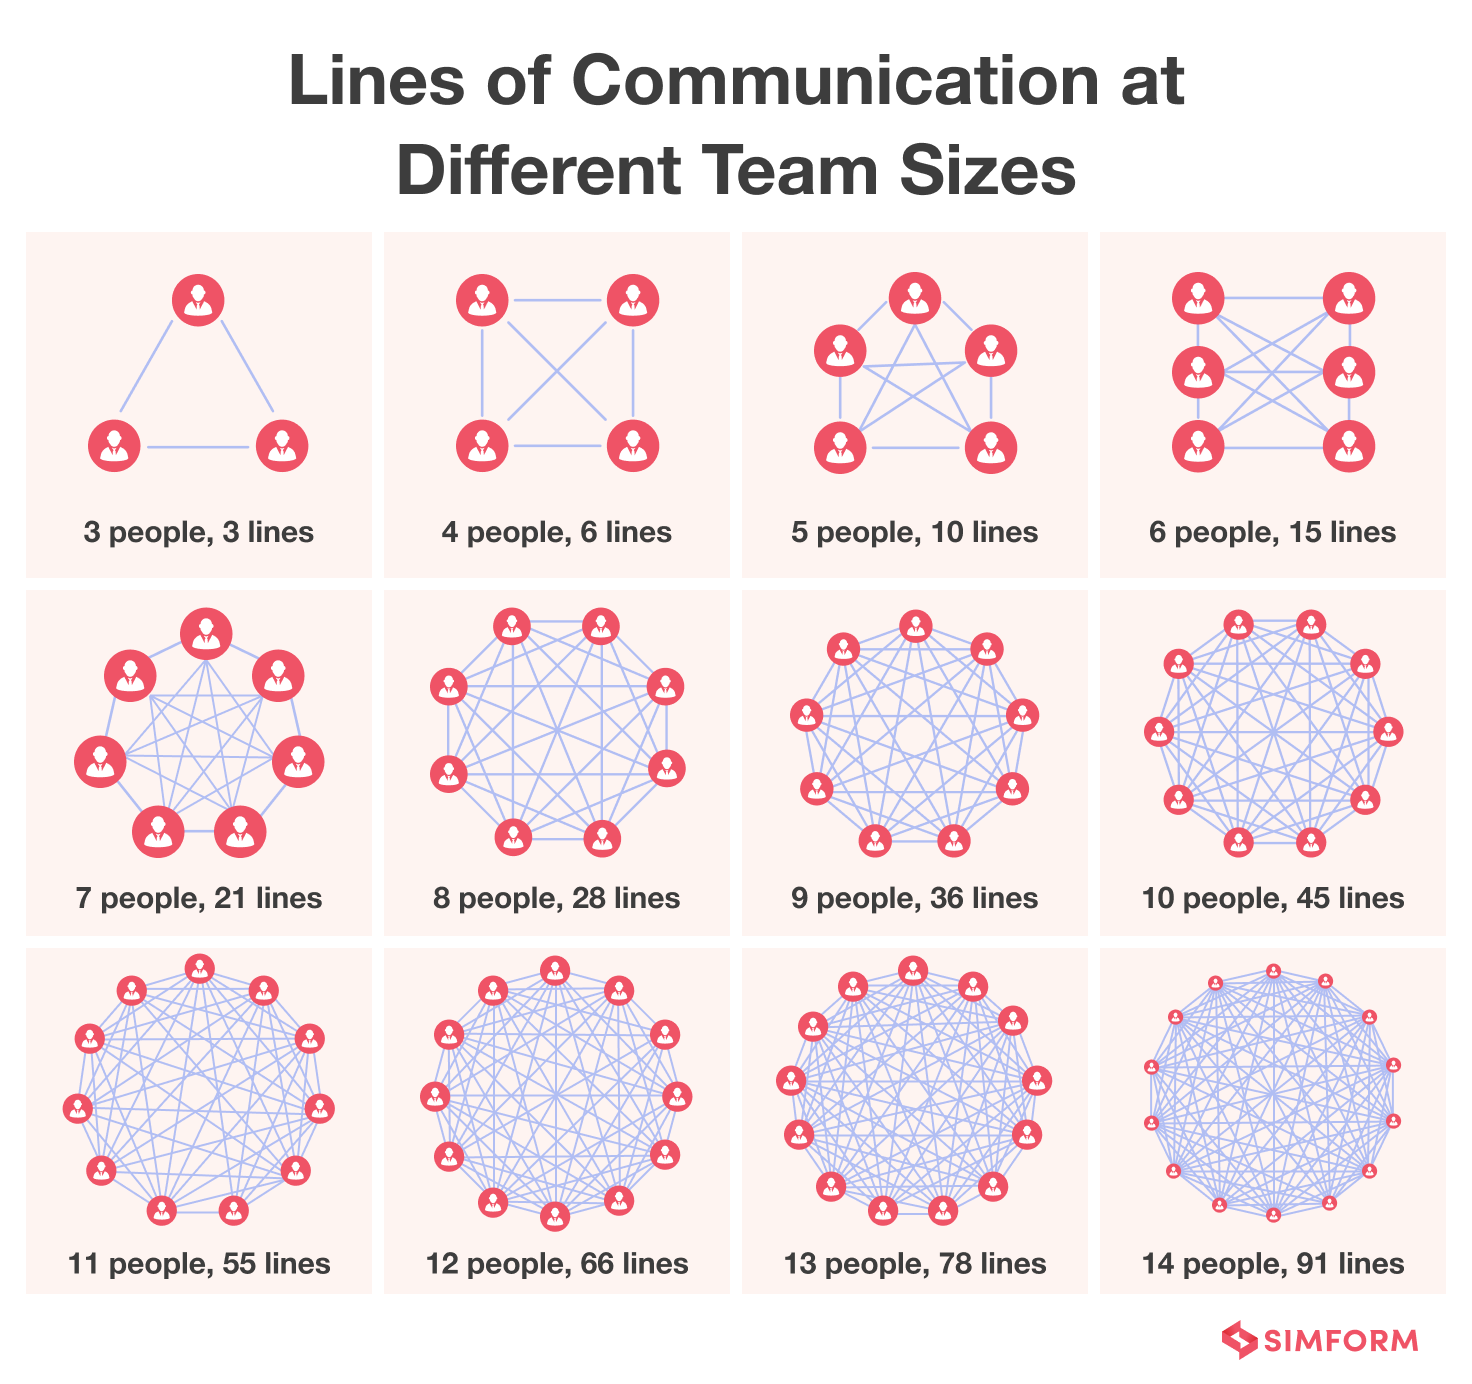 Lines of Communication at Different Team Sizes